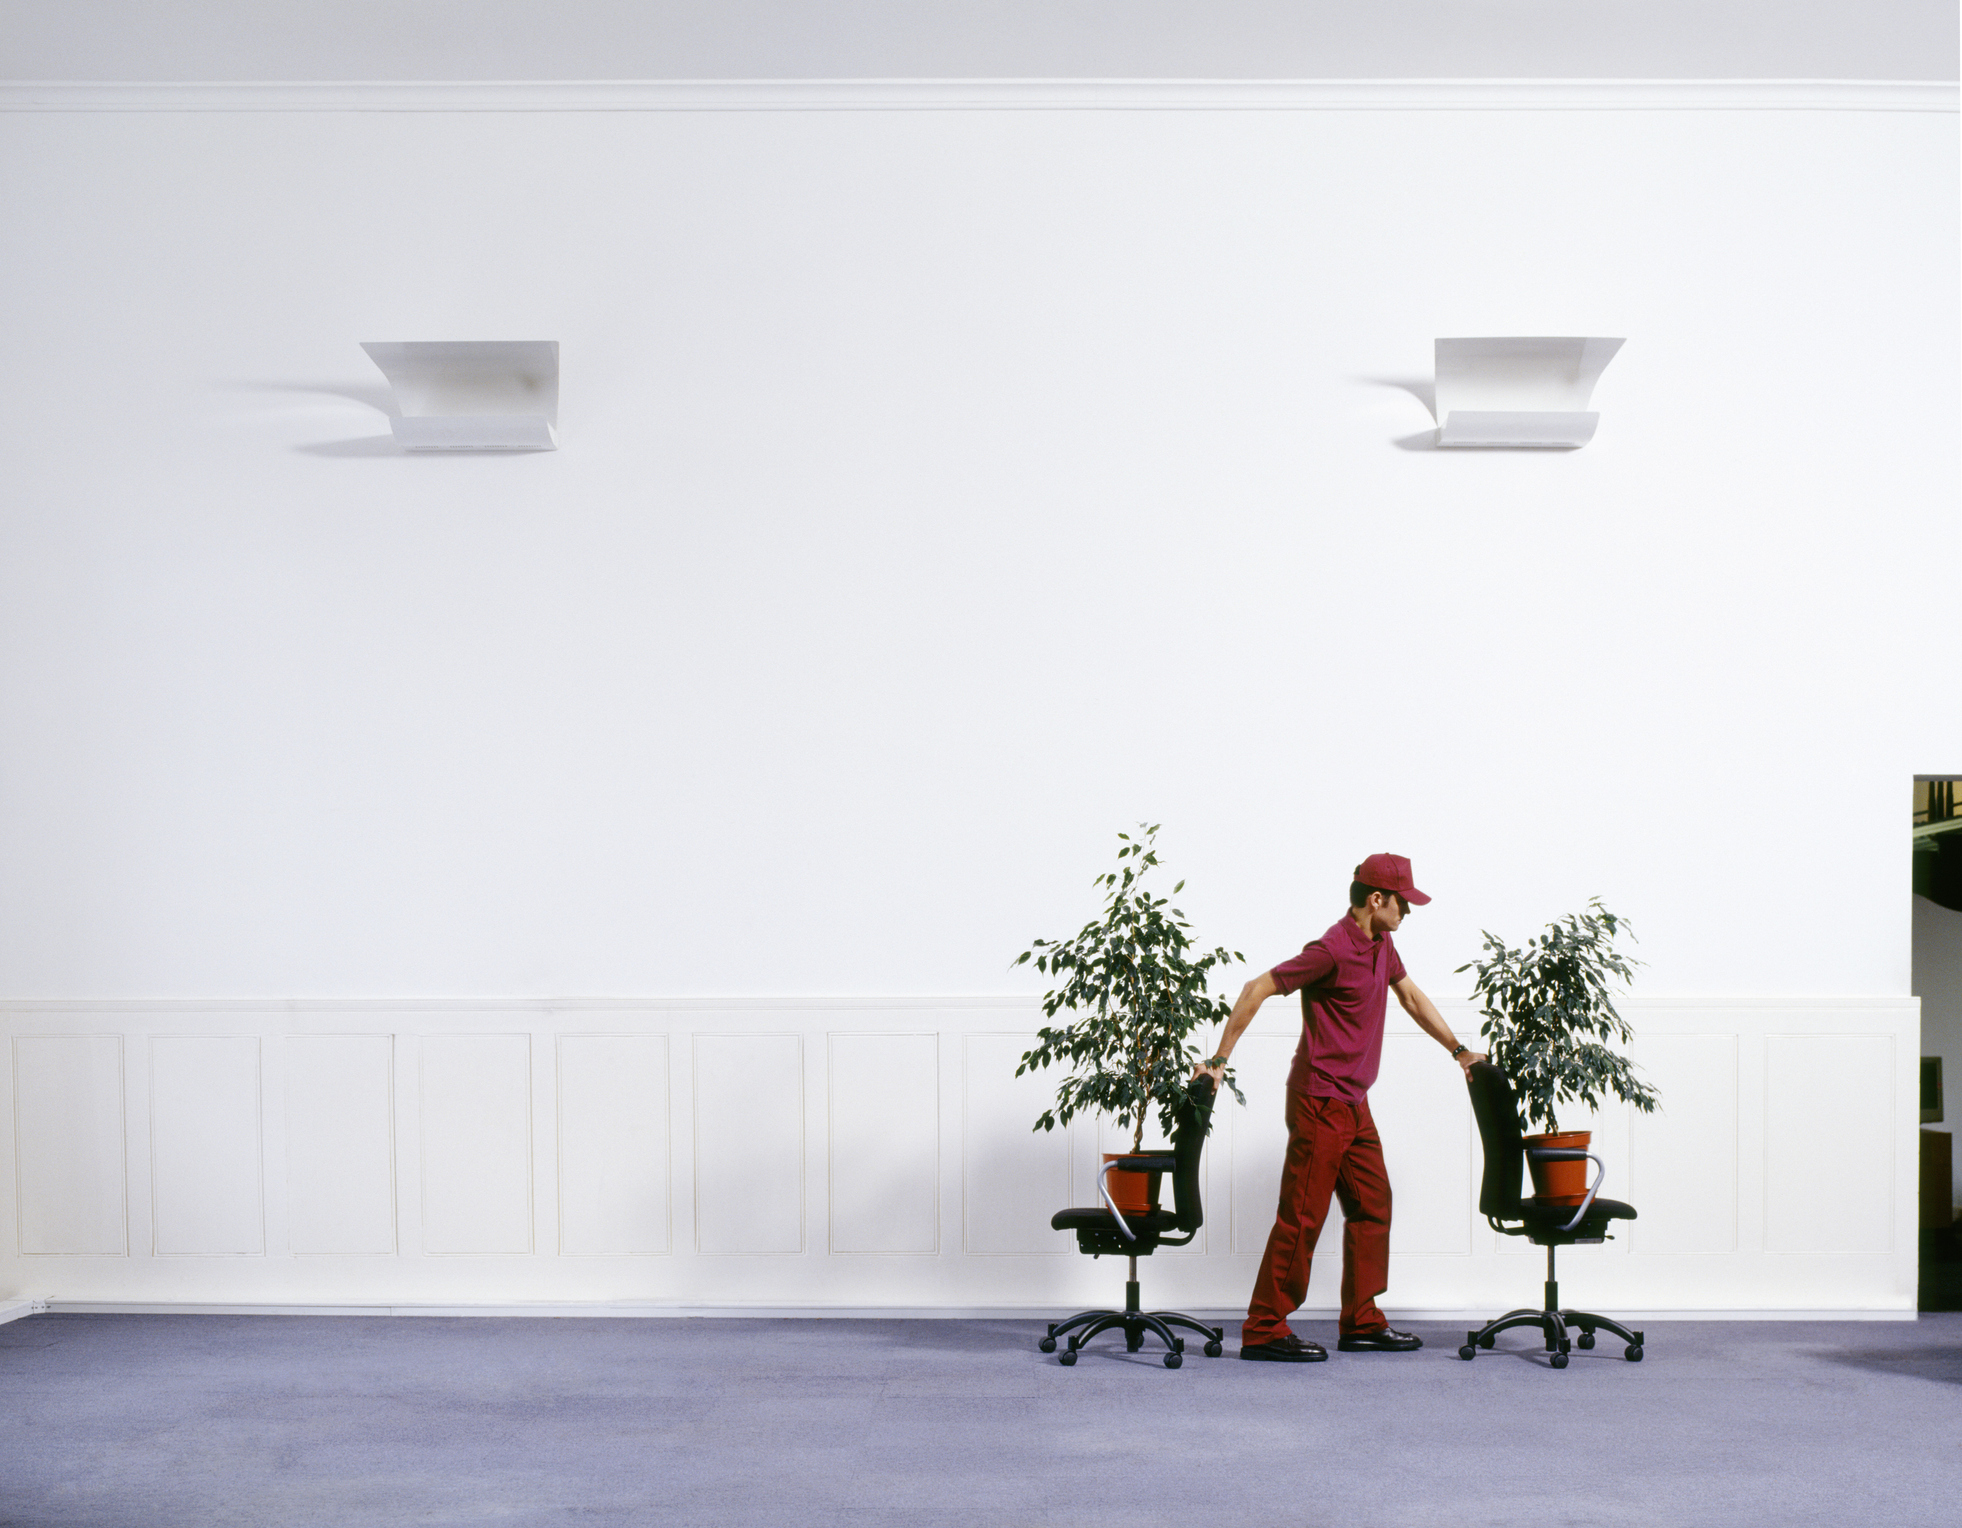 A photo of a man in a worker’s uniform wheeling office chairs, on top of which plants perch, through an empty-looking office setting.